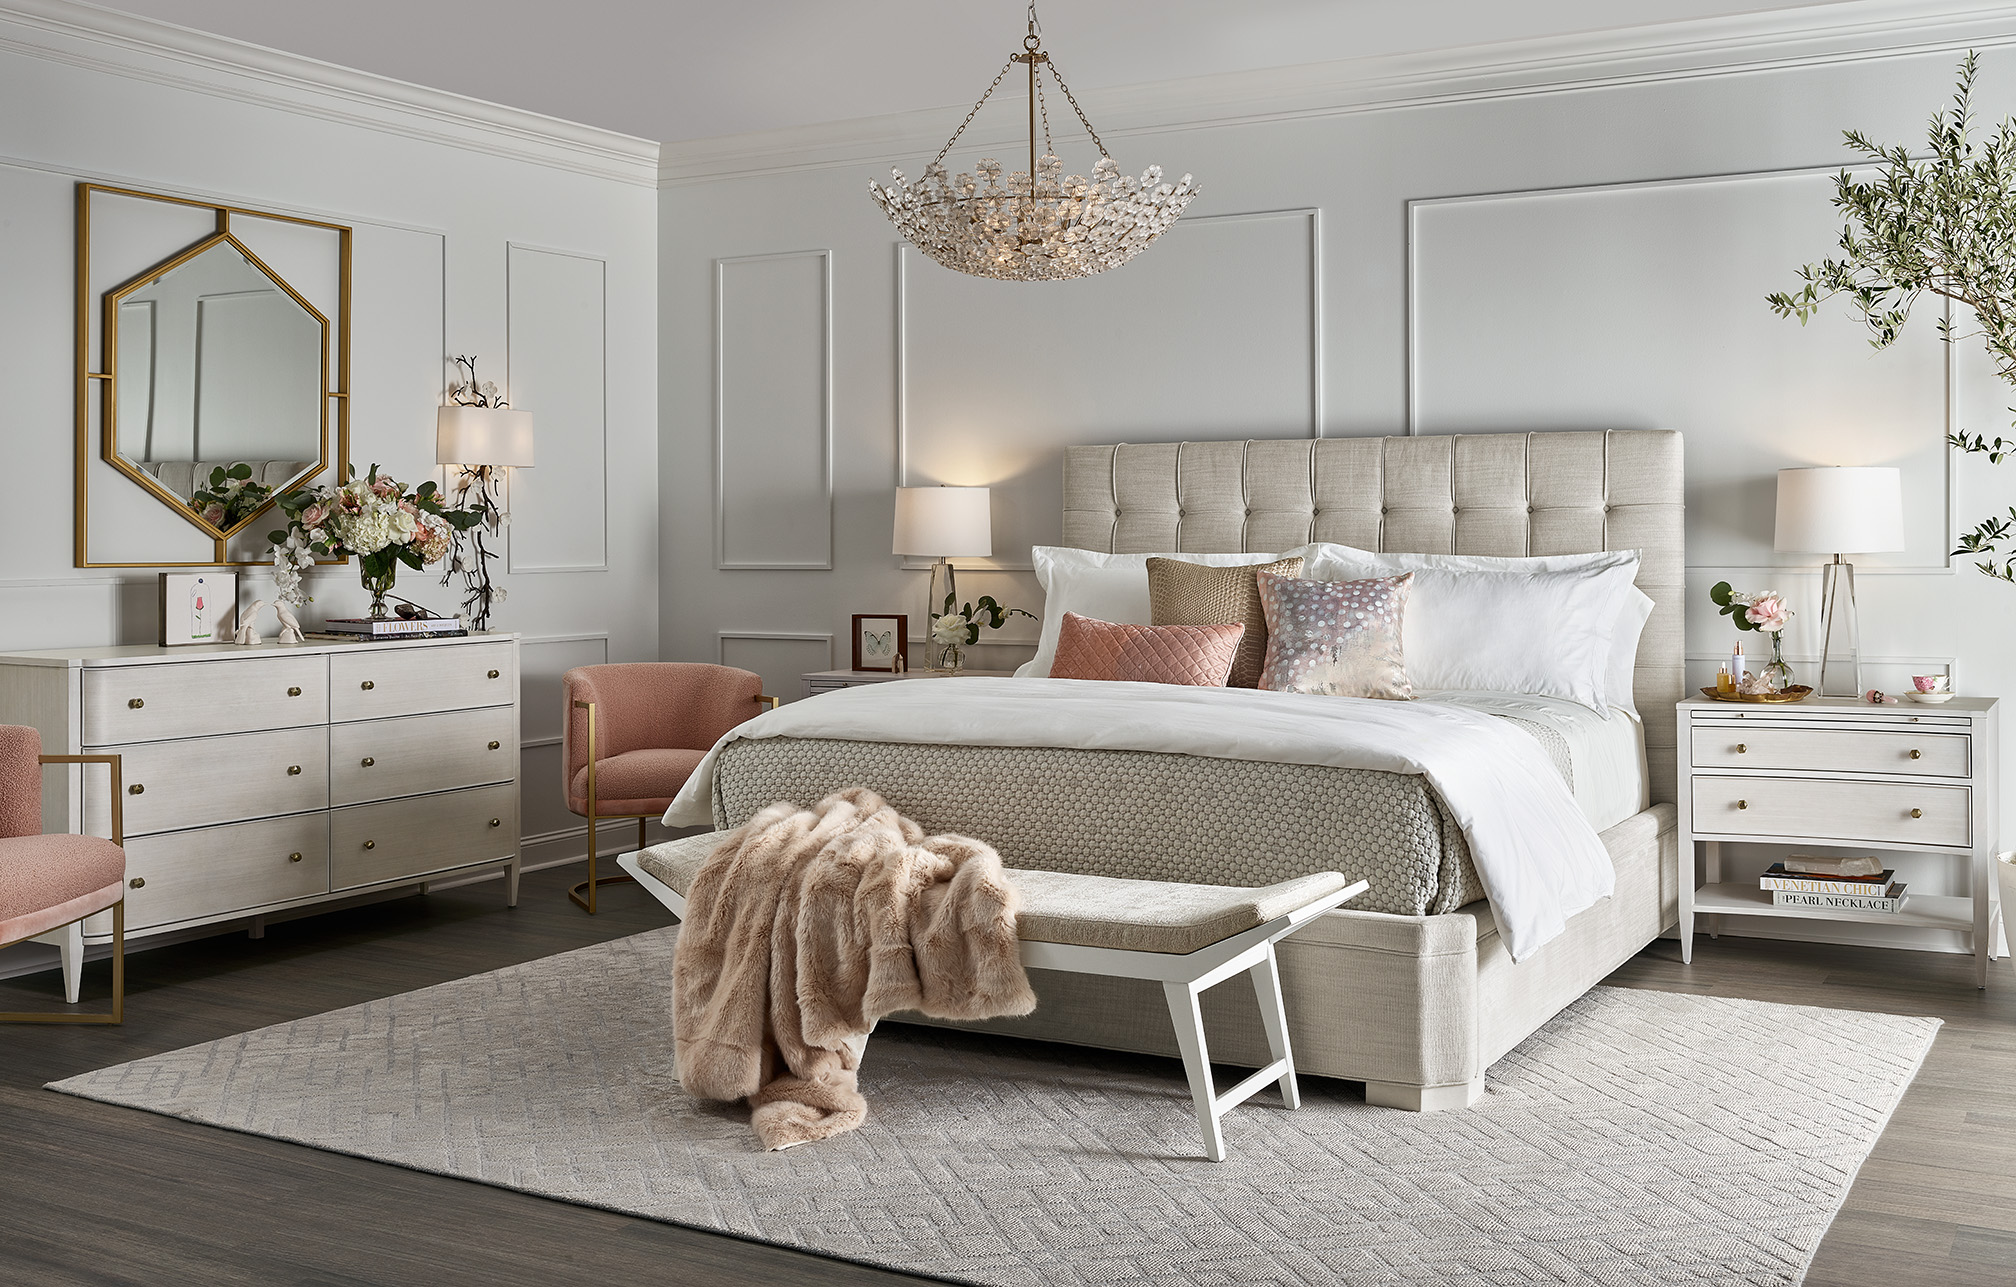 Image of a bed from the Miranda Kerr Home collection